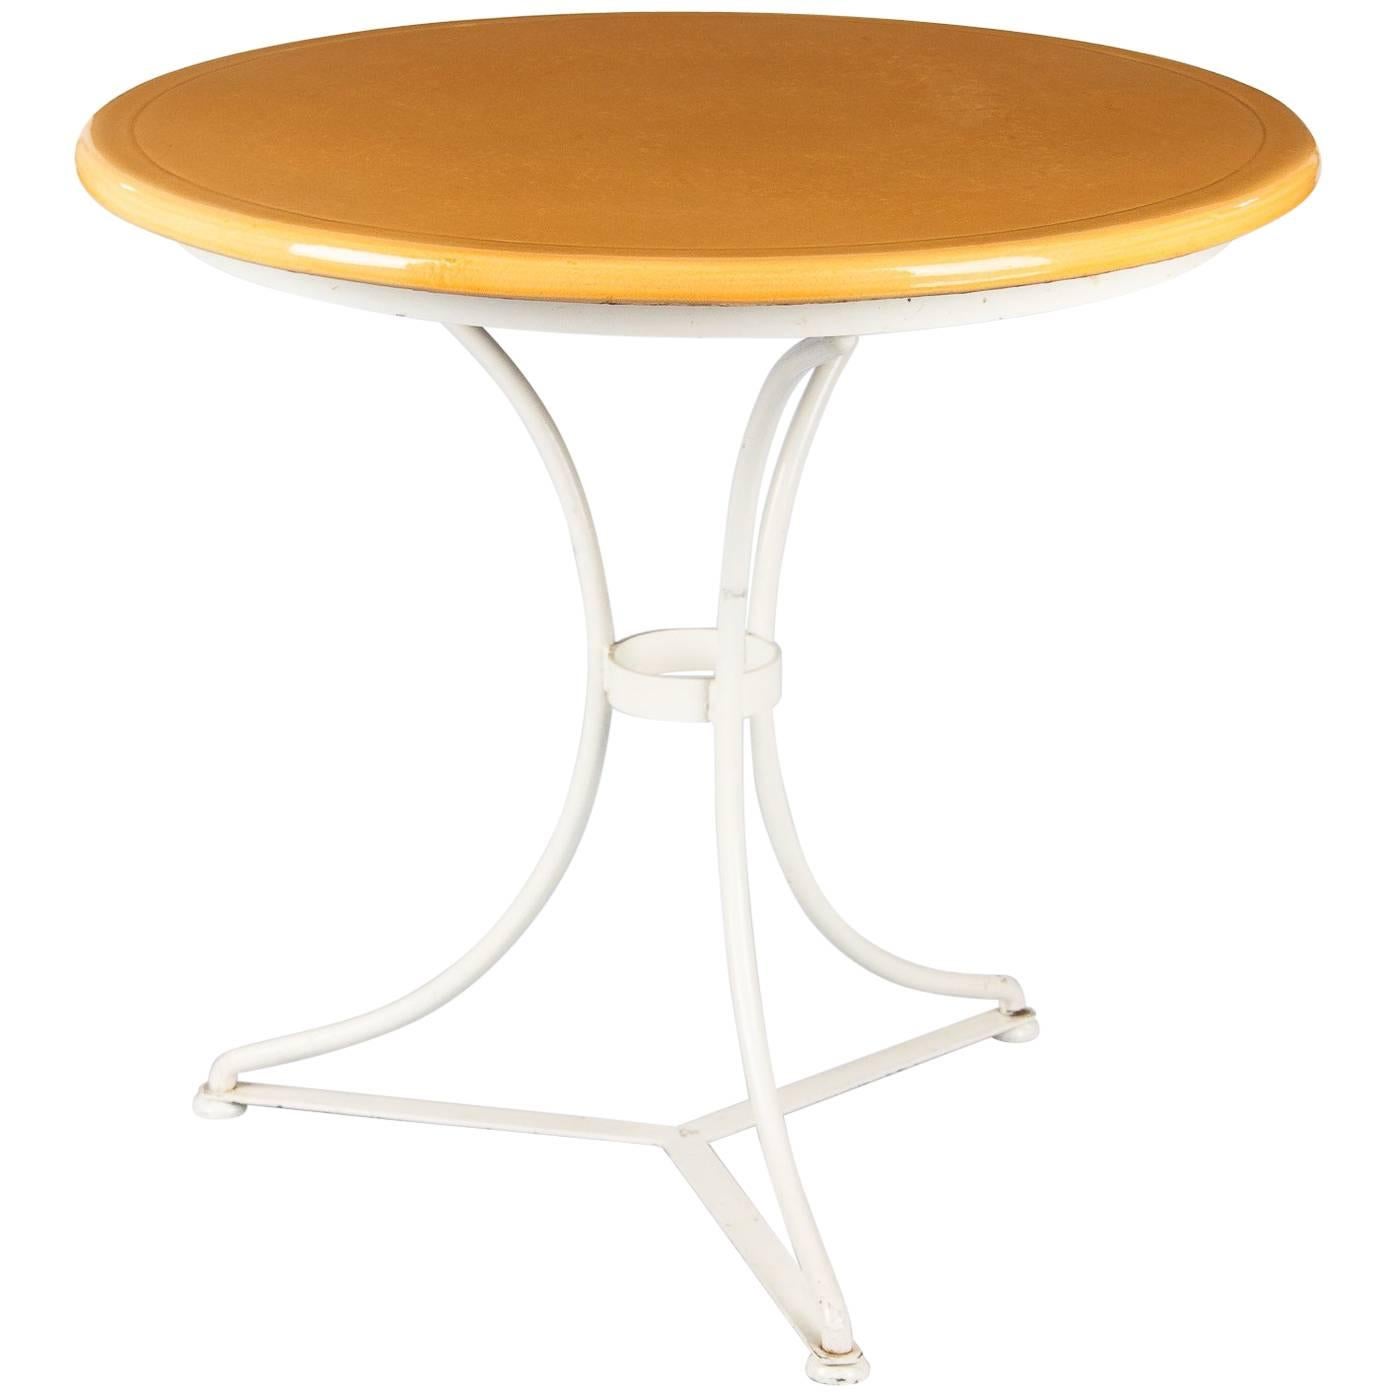 French Round Iron Table with Enameled Lava Top, 1960s